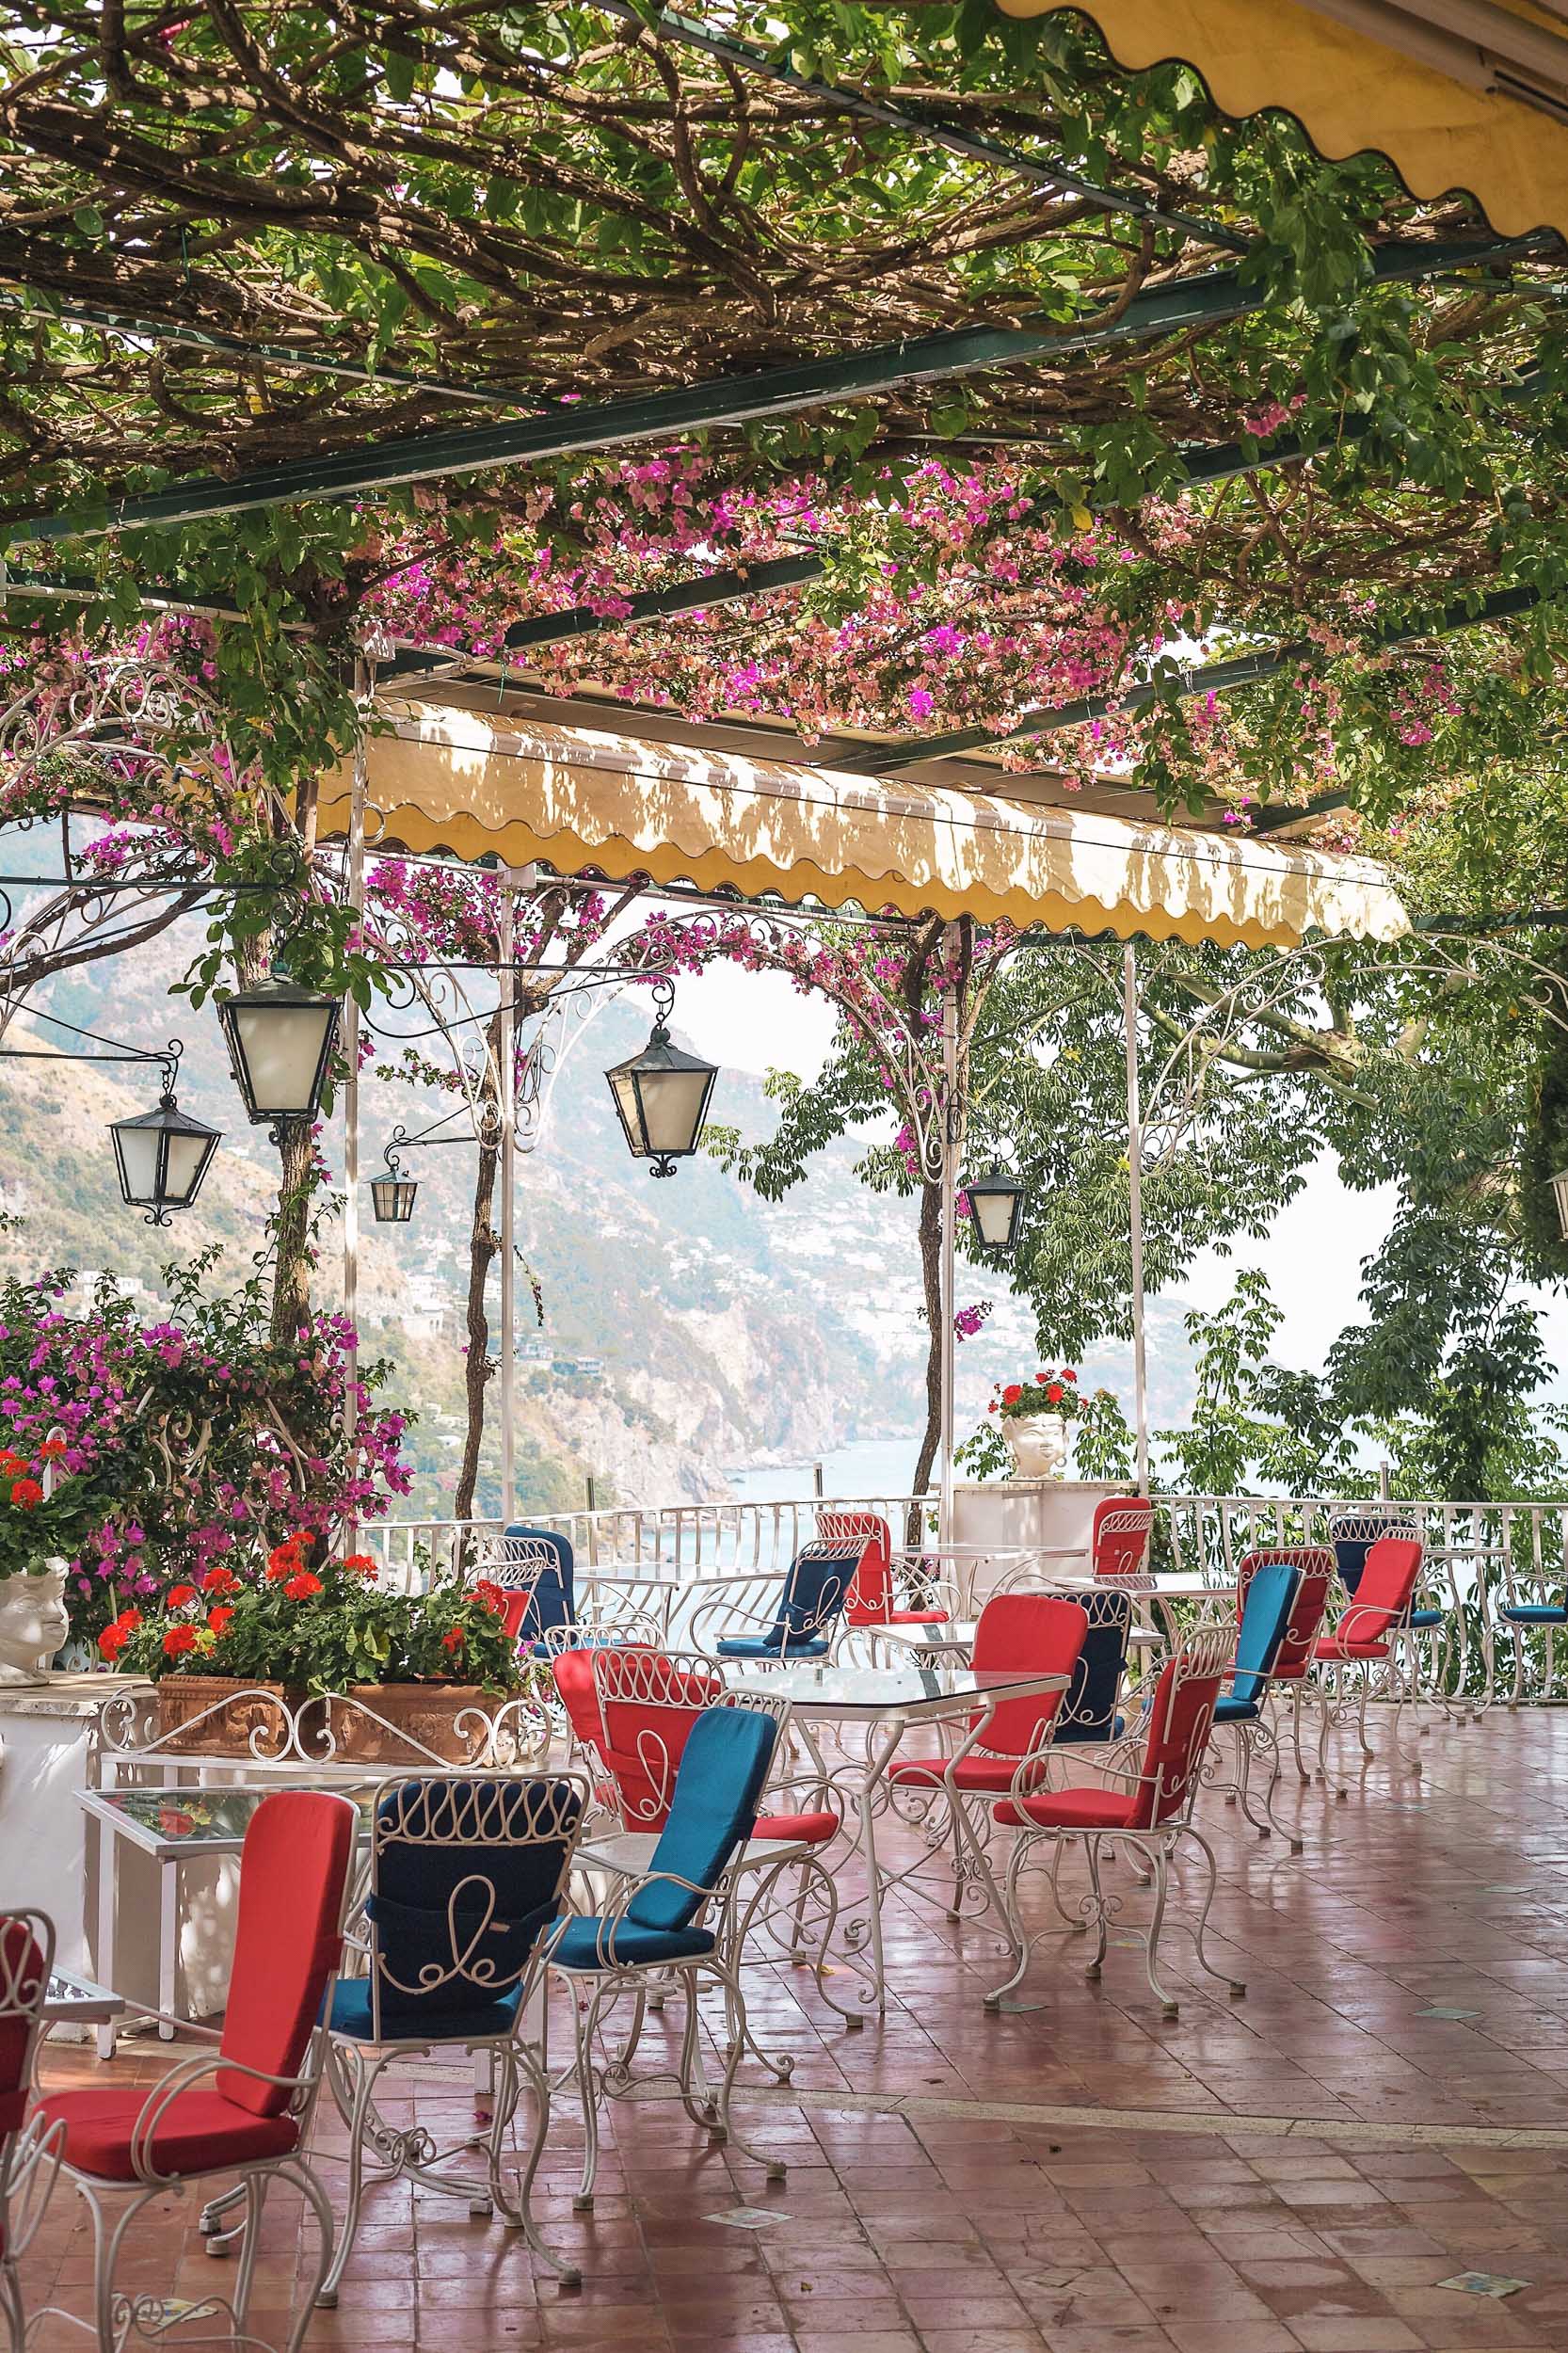 Hotel Poseidon in Positano, a place you should not miss when you visit the Amalfi Coast